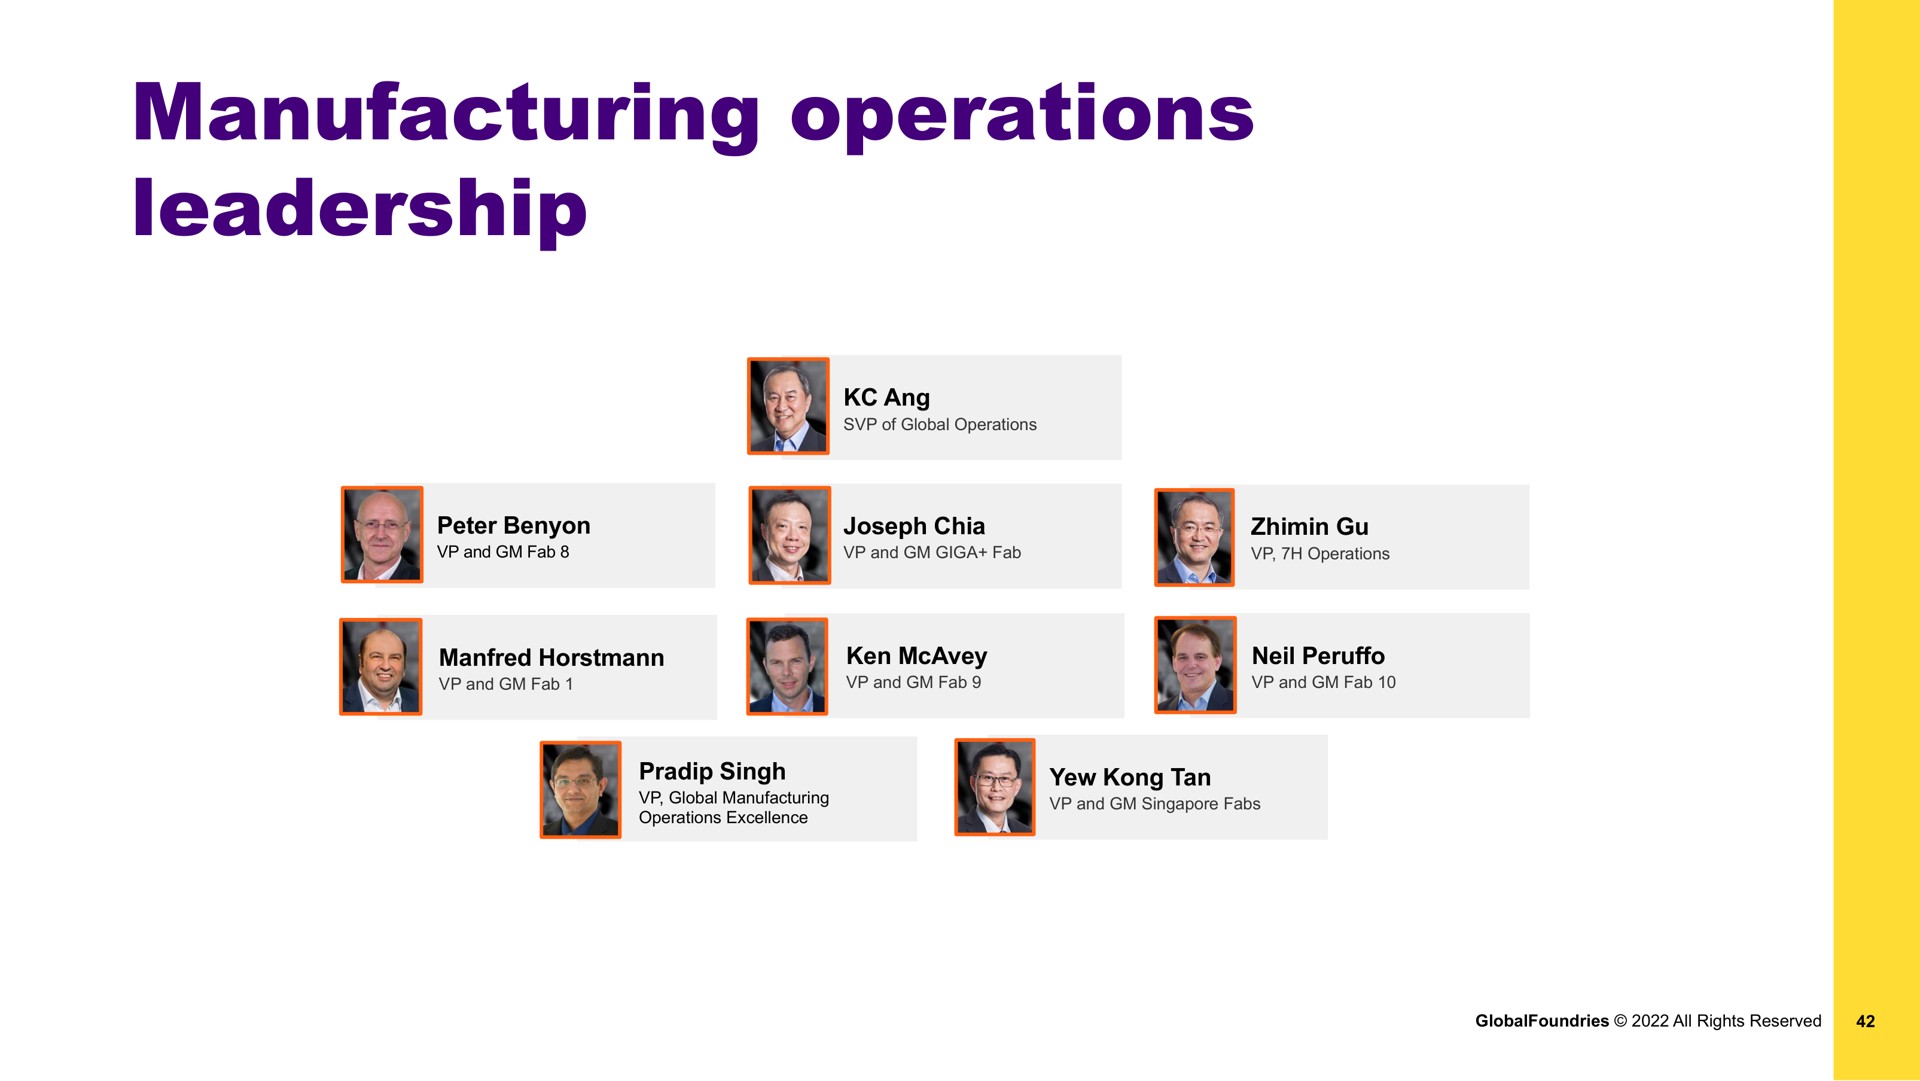 manufacturing operations leadership | GlobalFoundries